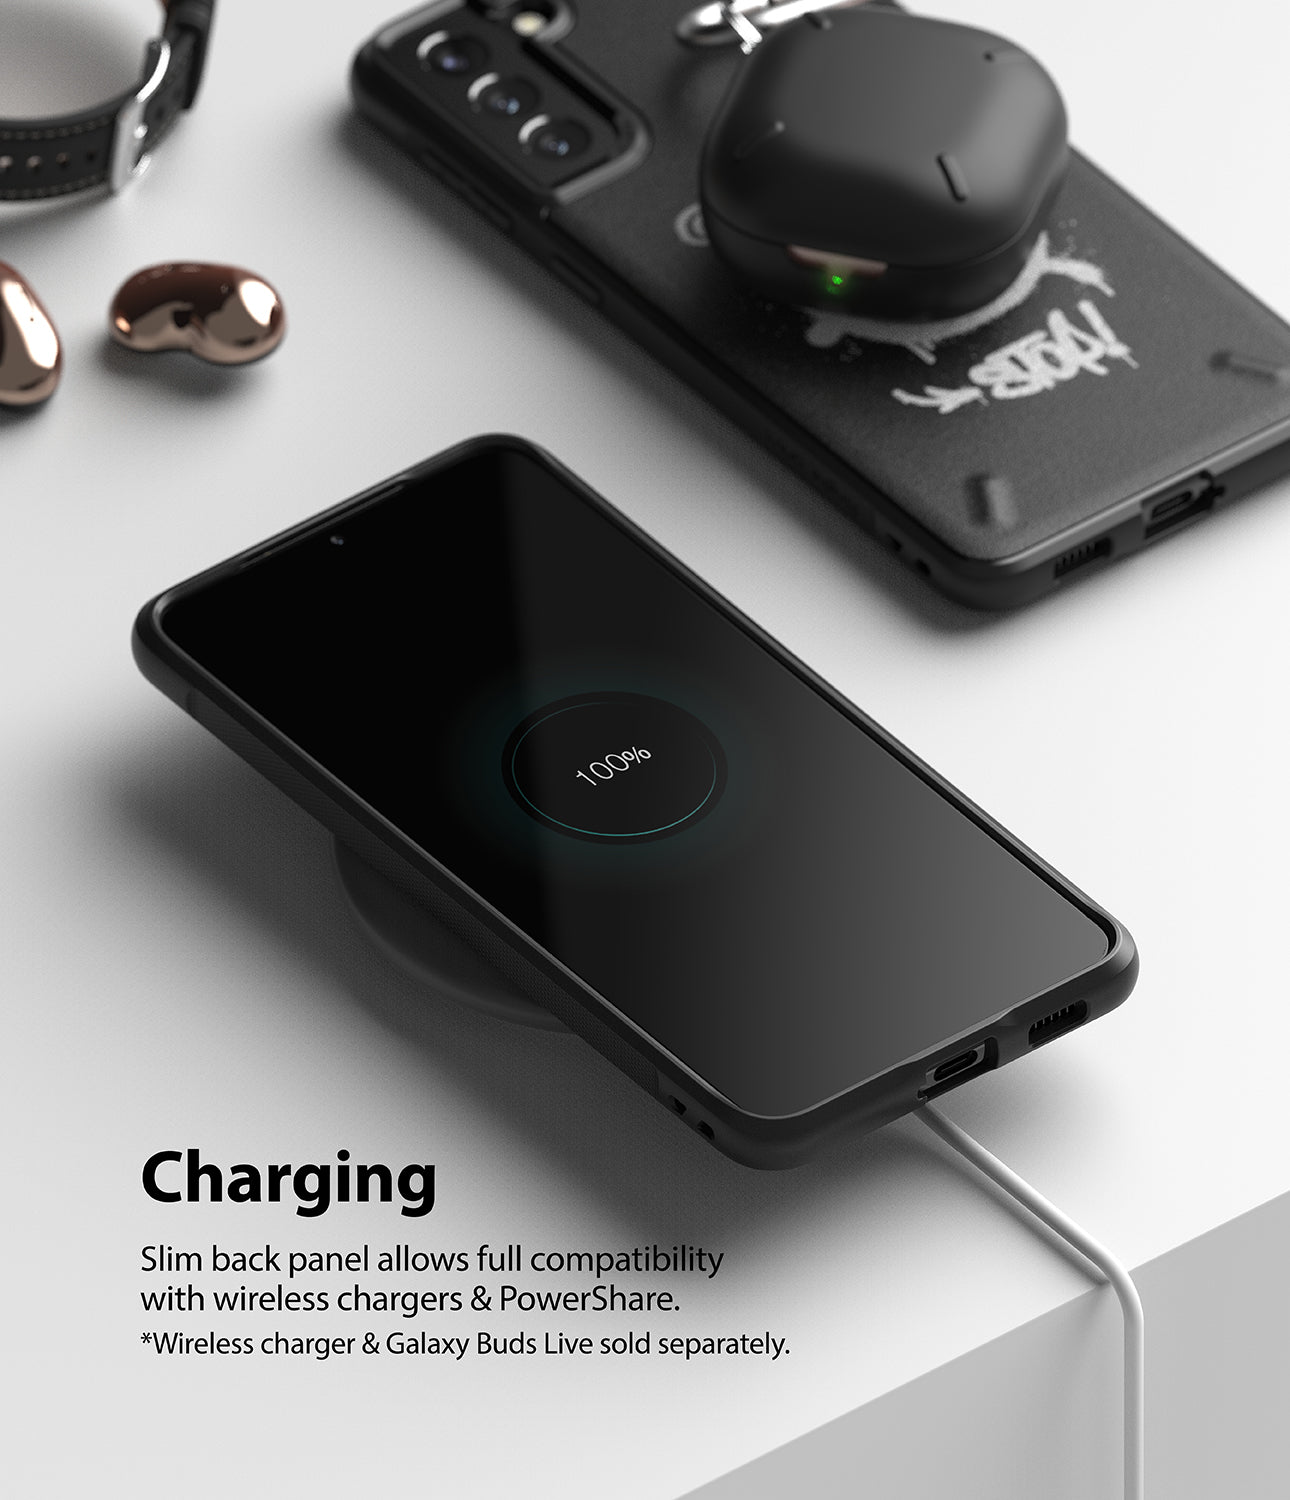 wireless charging and powershare compatible